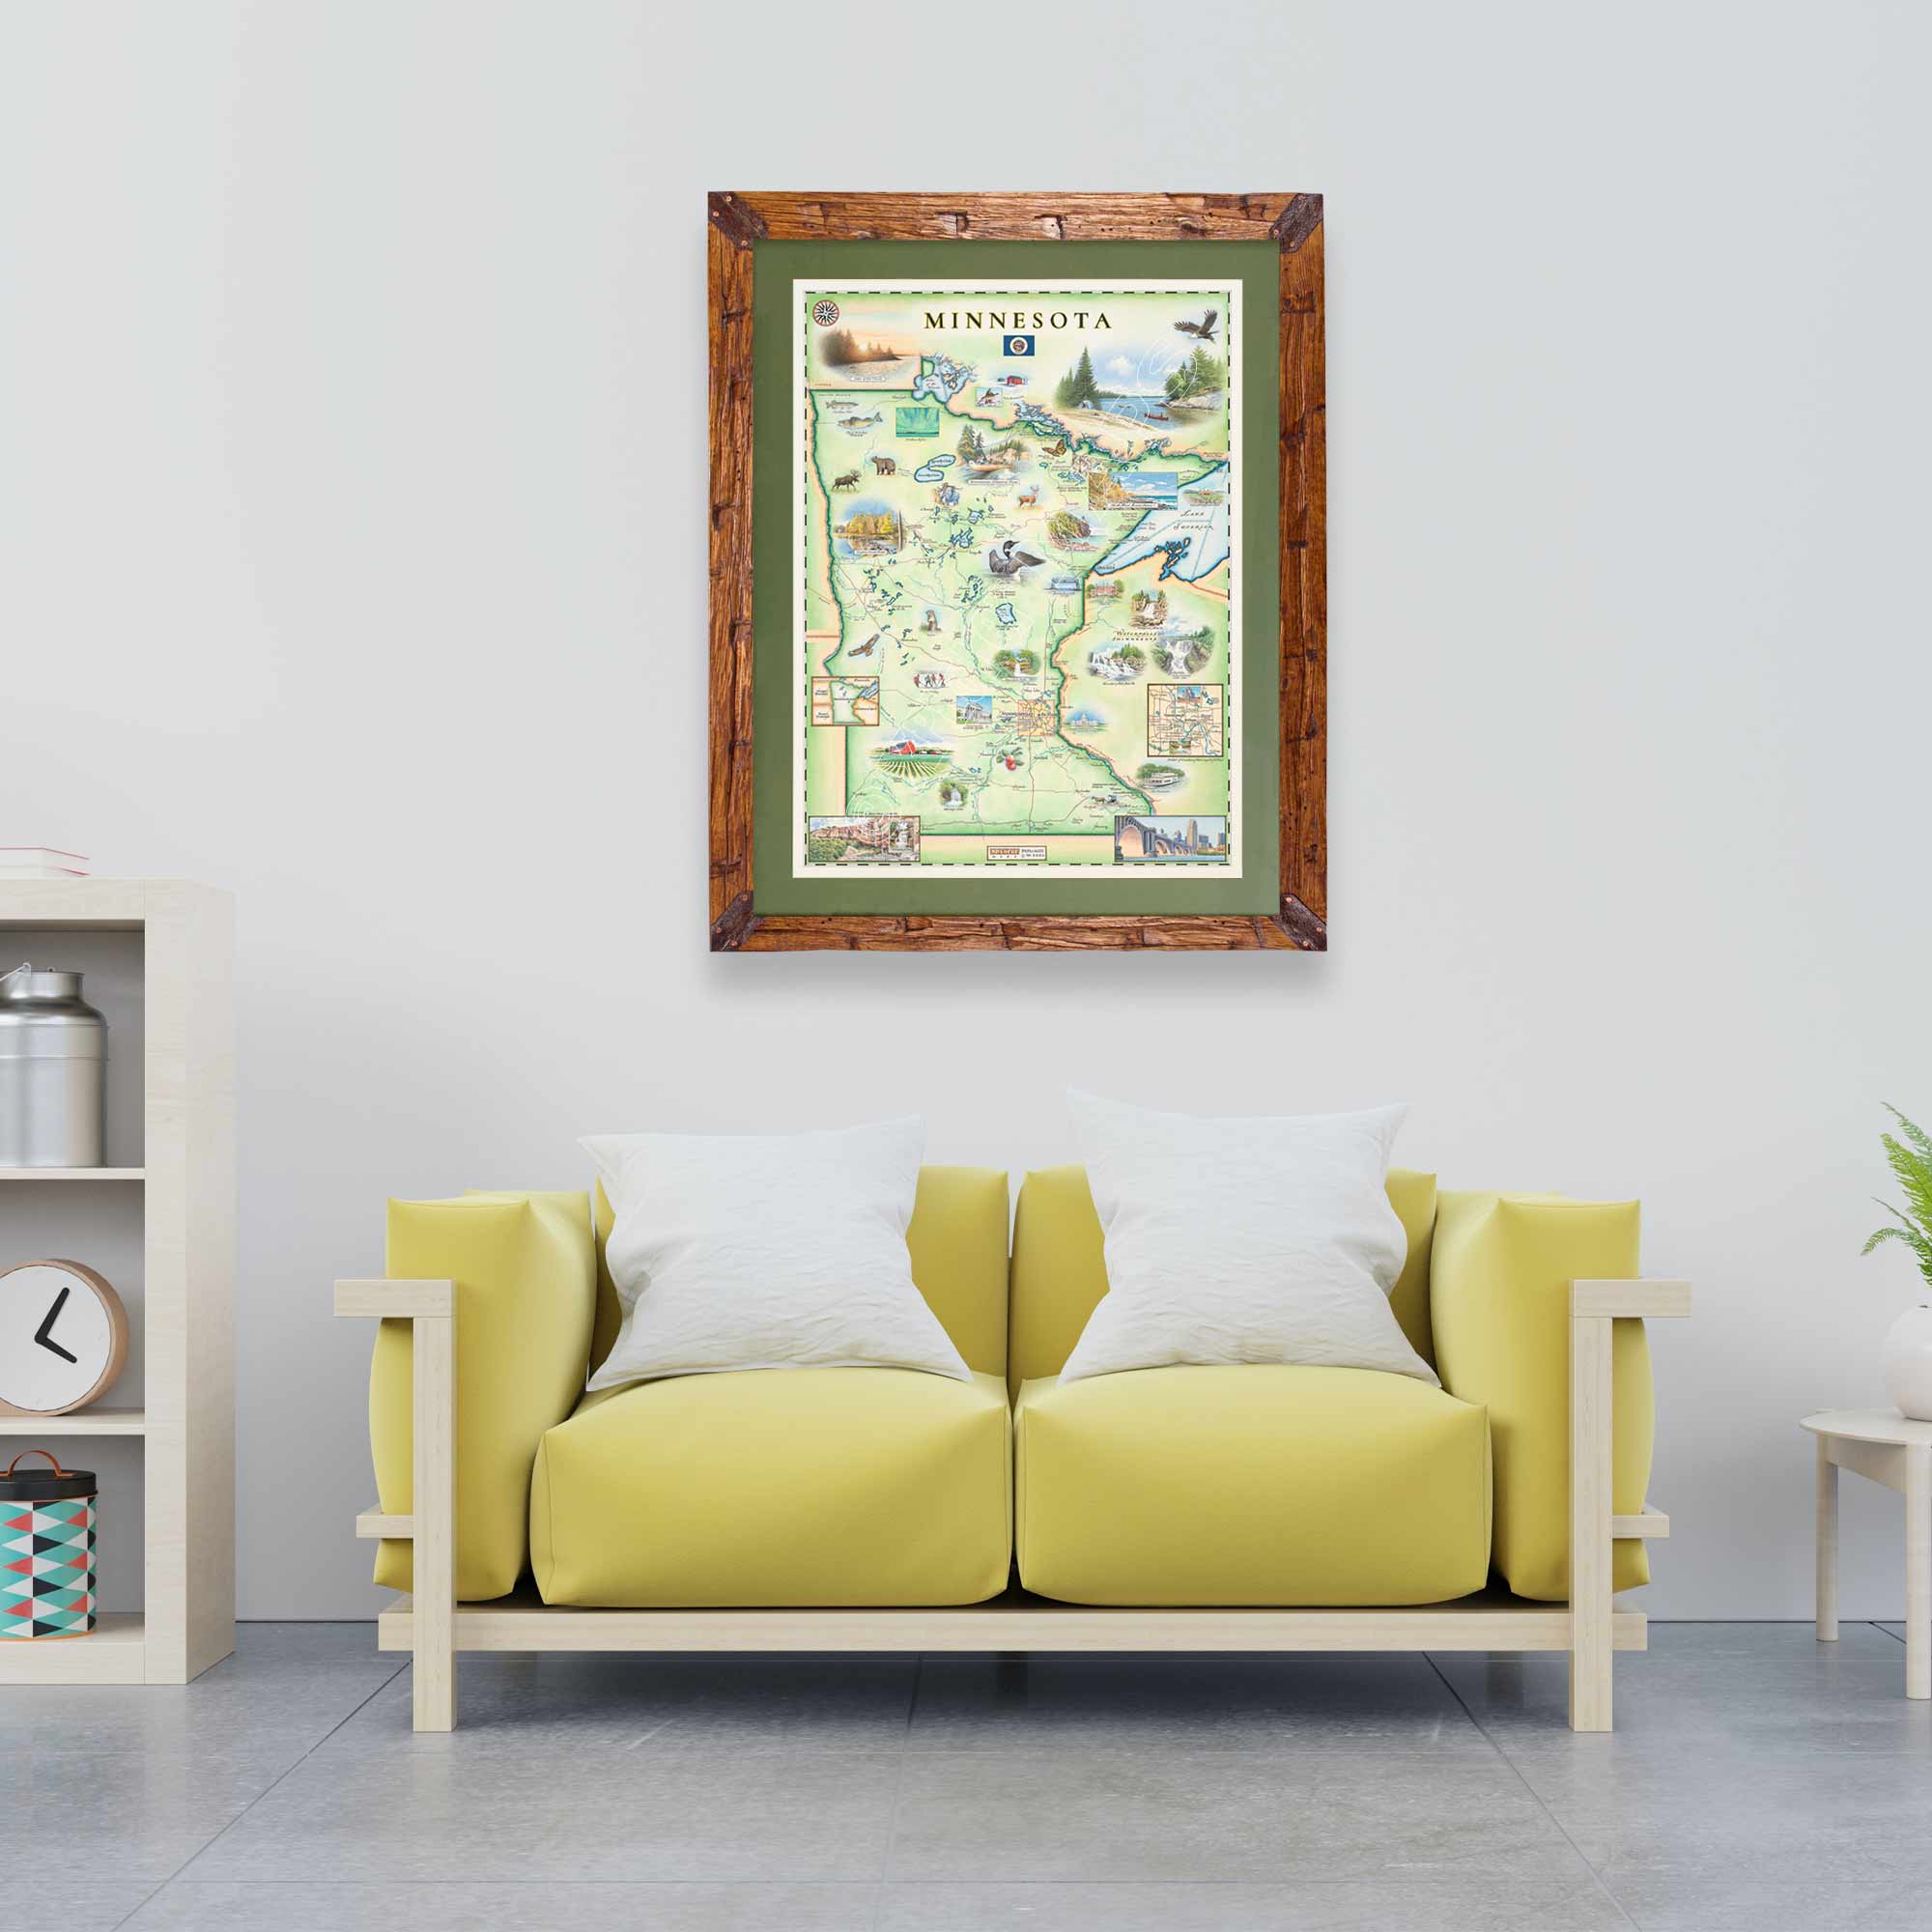 Minnesota State hand-drawn map in earth-tone colors by Xplorer Maps hanging on a wall above a yellow couch. The print is framed in pine with a green frame. 